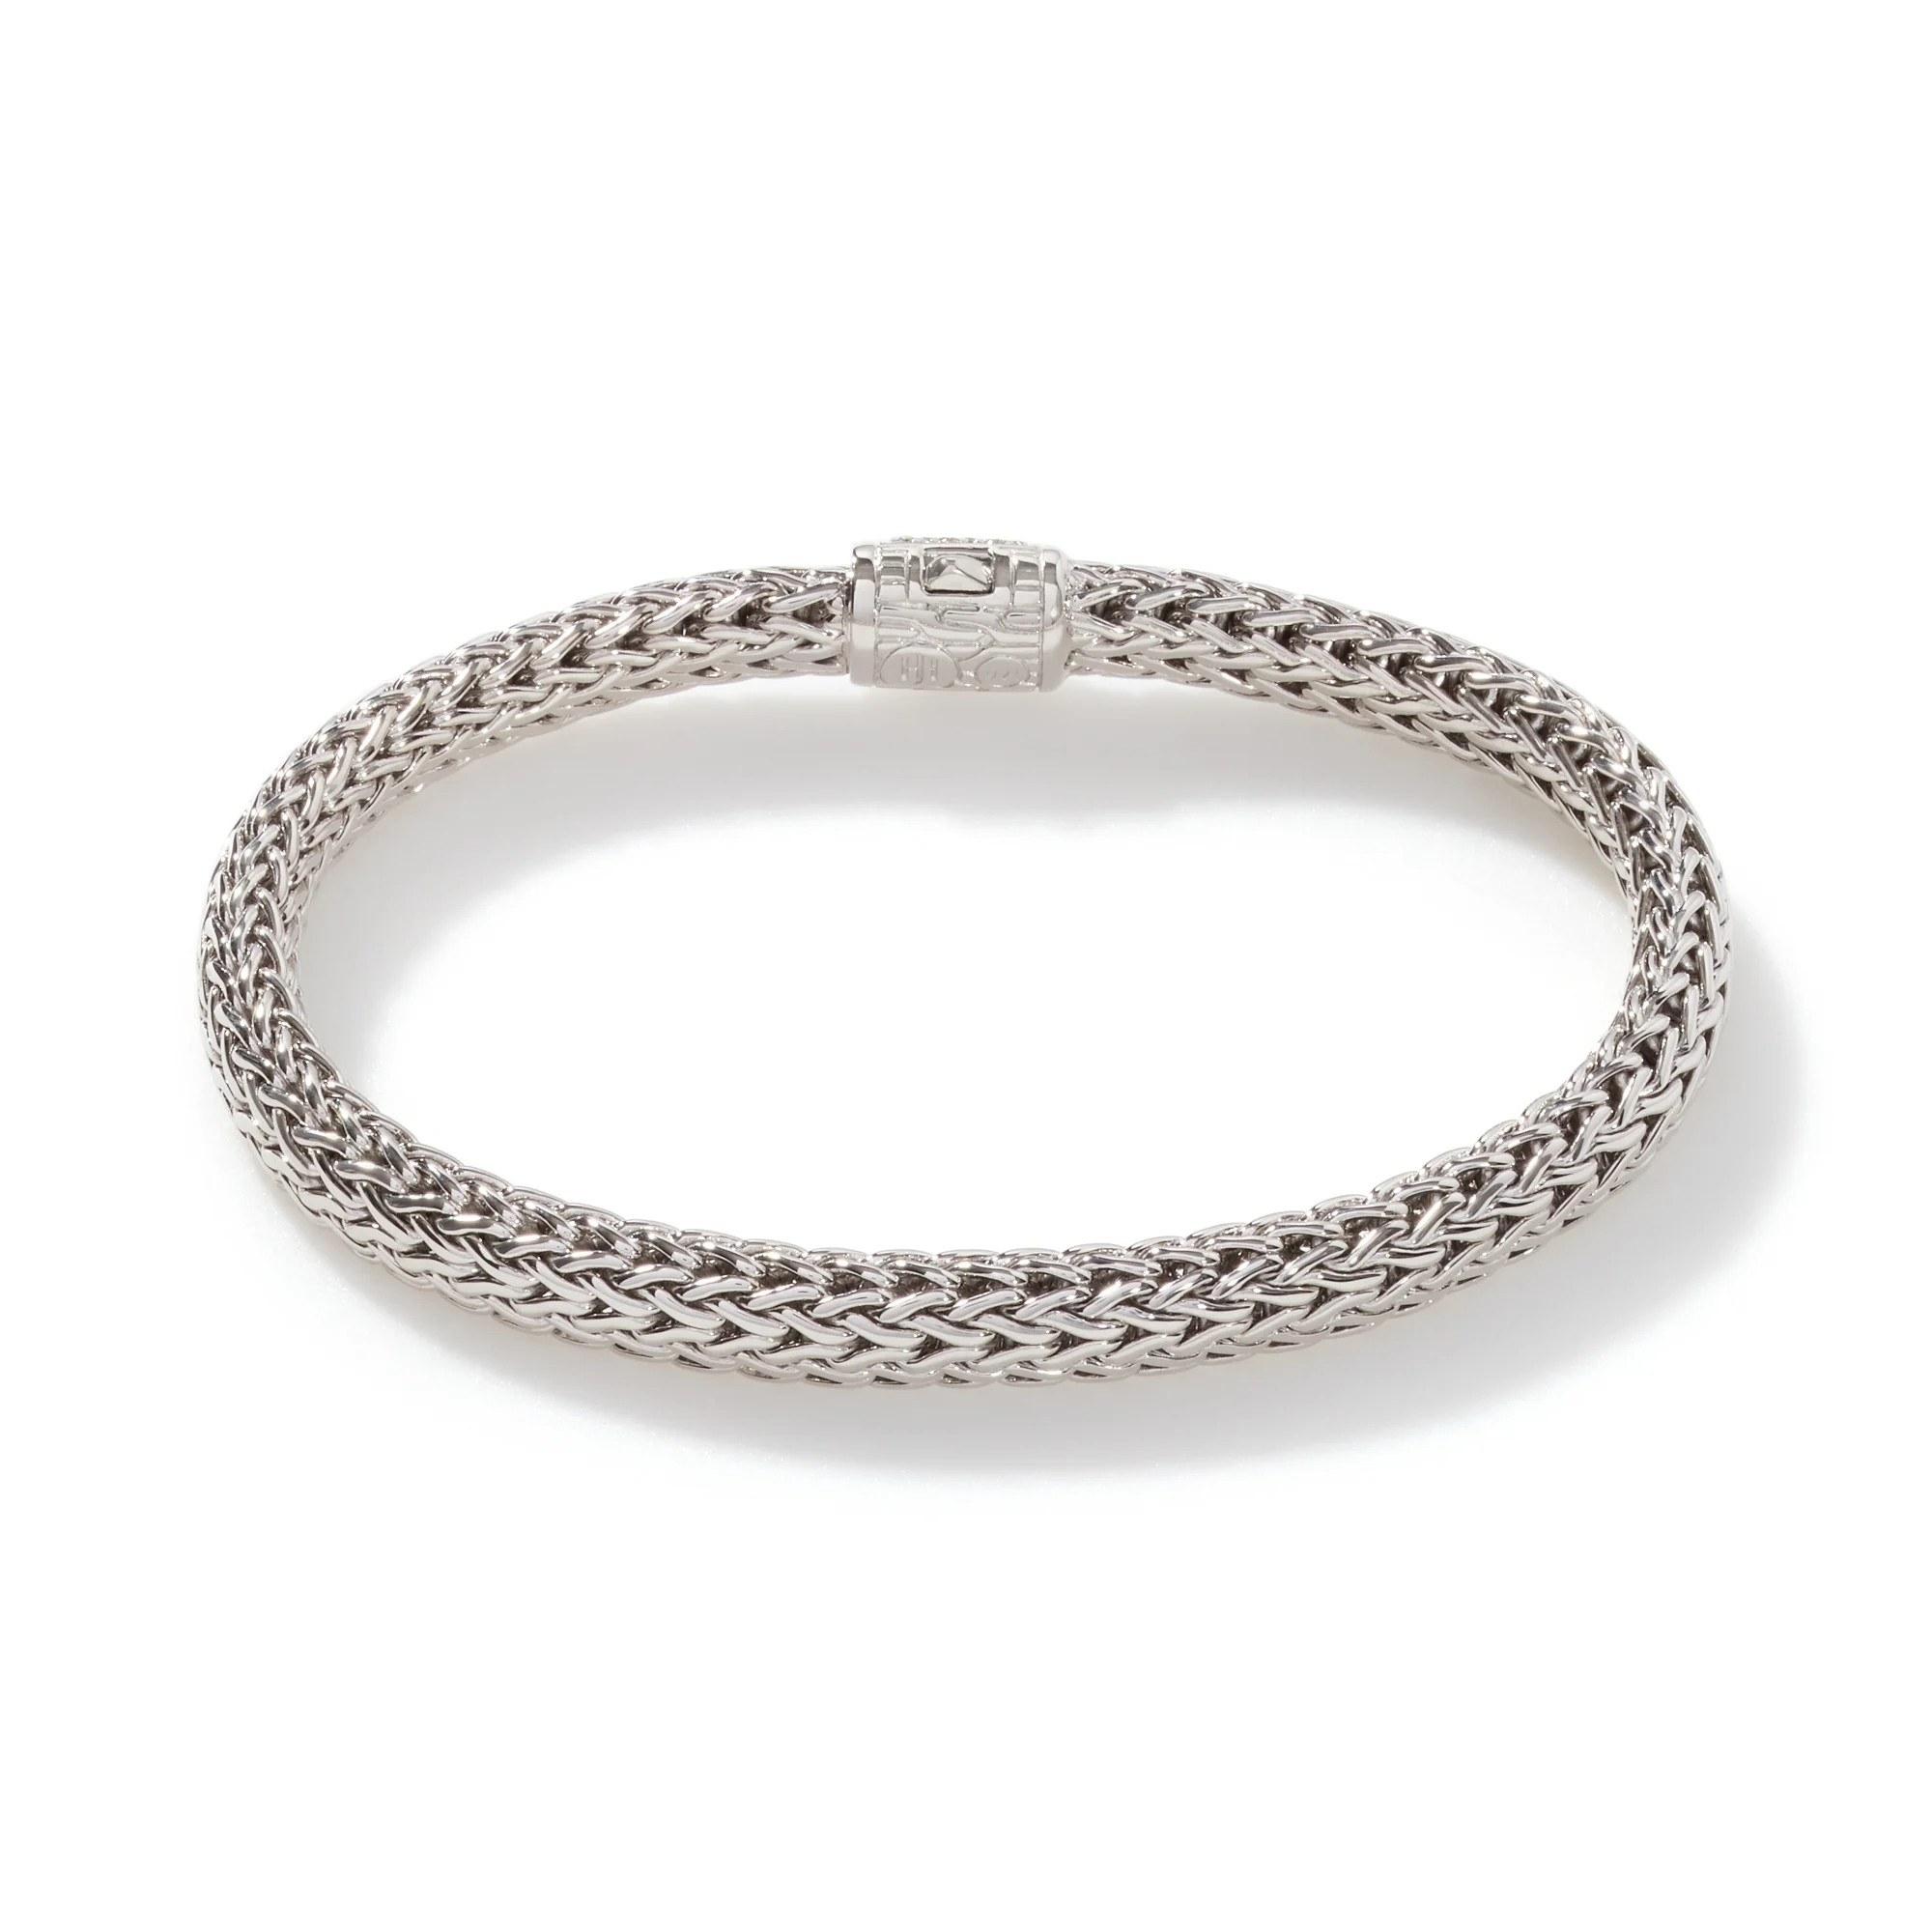 John Hardy Small Woven Chain Bracelet with Diamond Accents 3